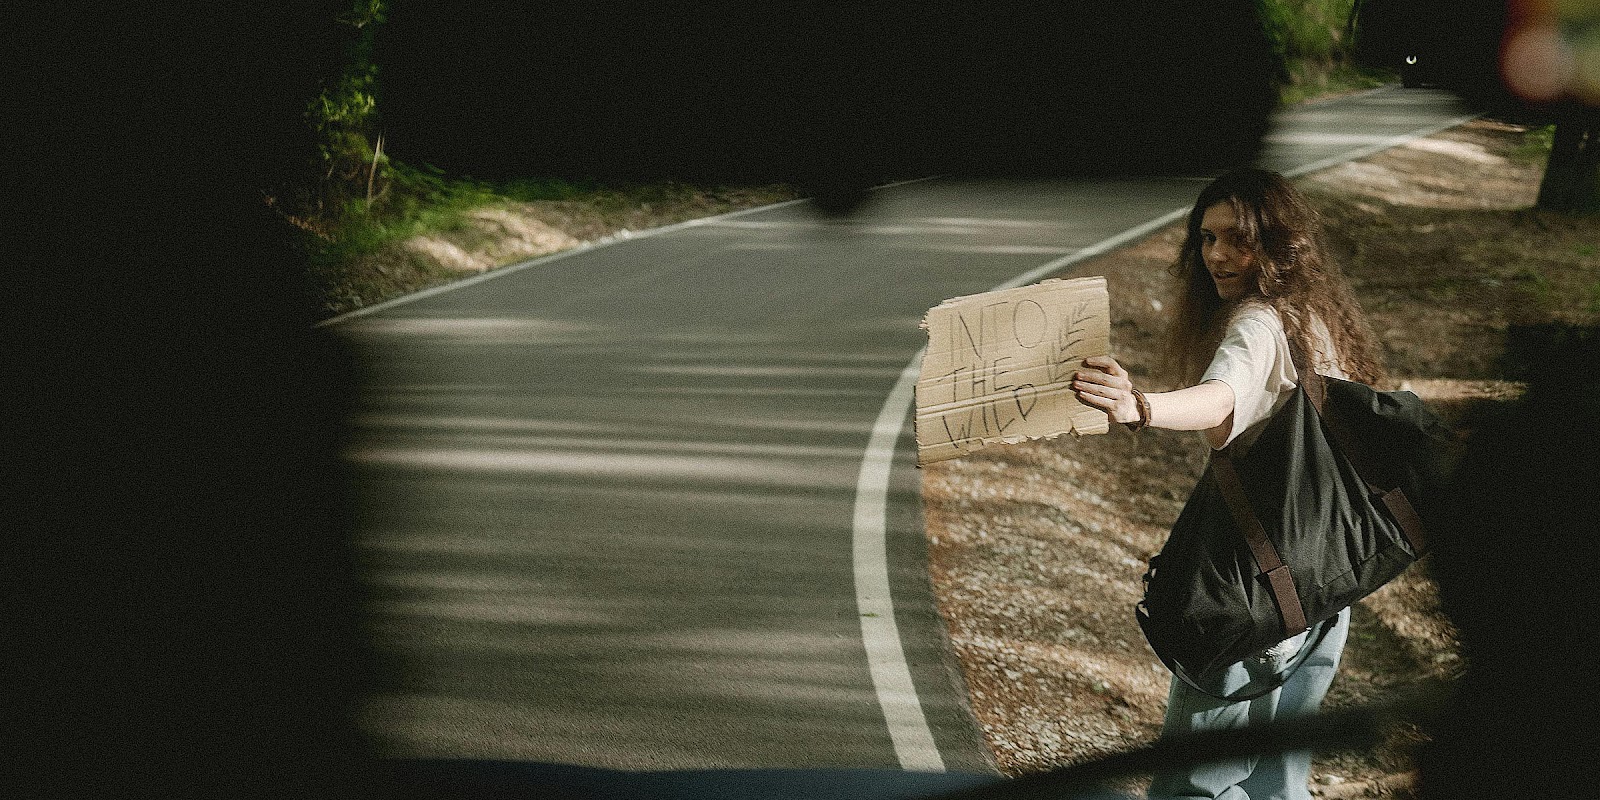 A woman hitchhikes| Source: Pexels